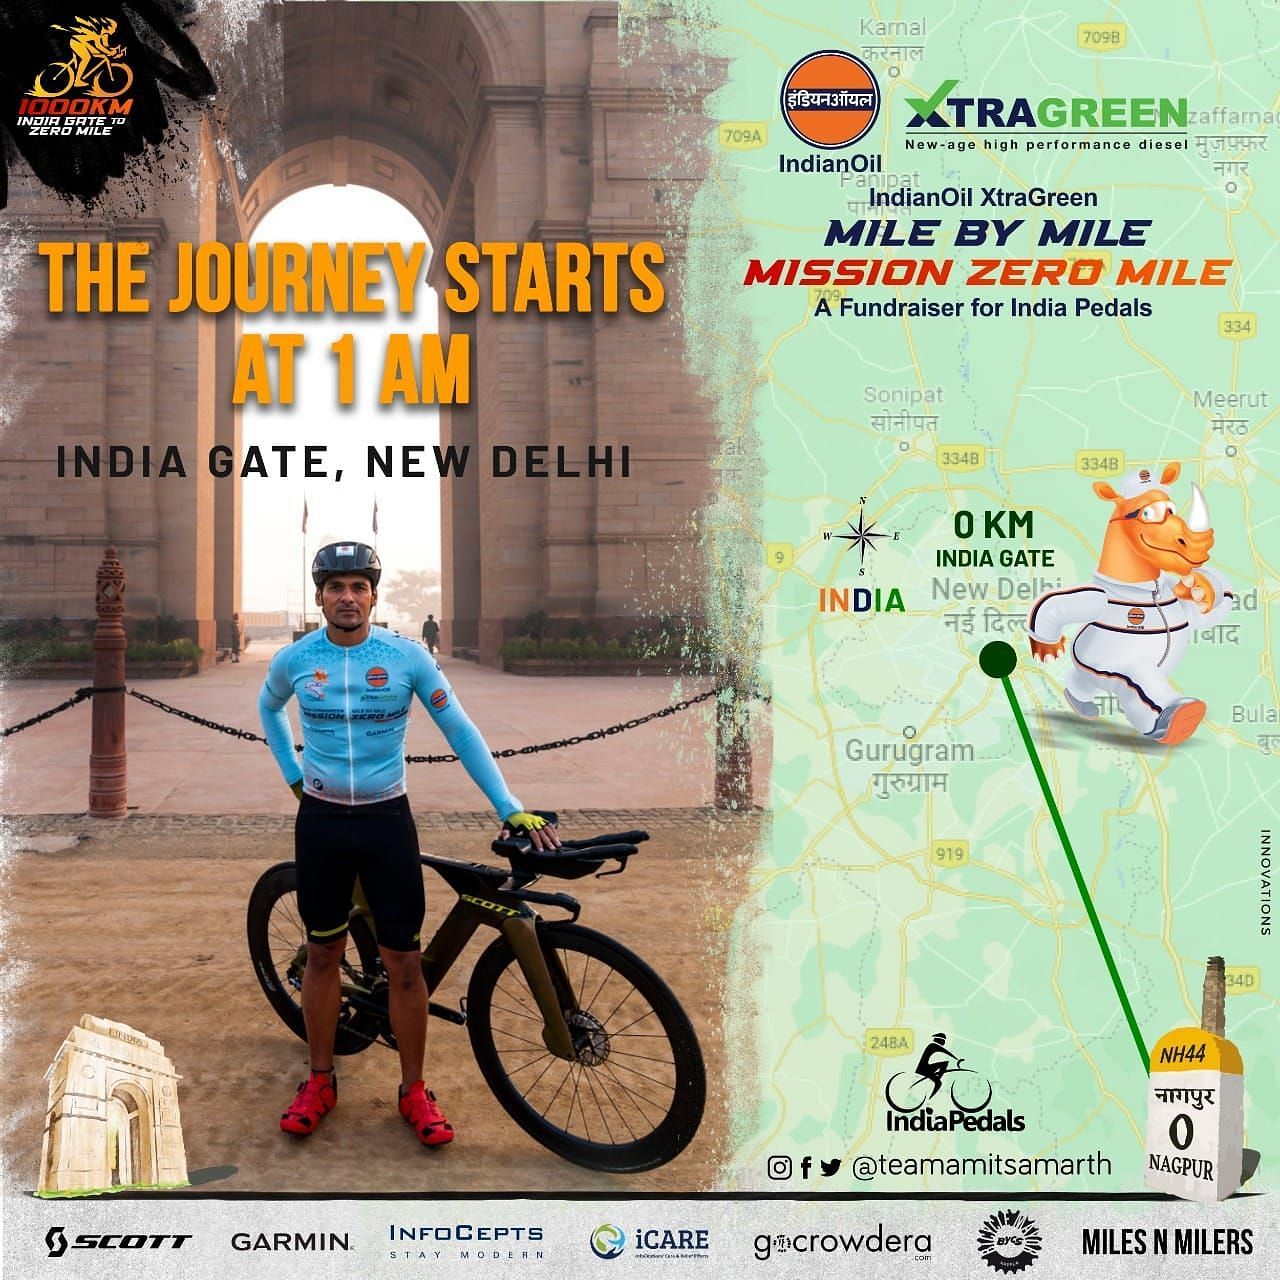 Dr Amit Samarth started his journey at 1 am on Saturday from India Gate, New Delhi and reached Zero Mile, Nagpur on Sunday